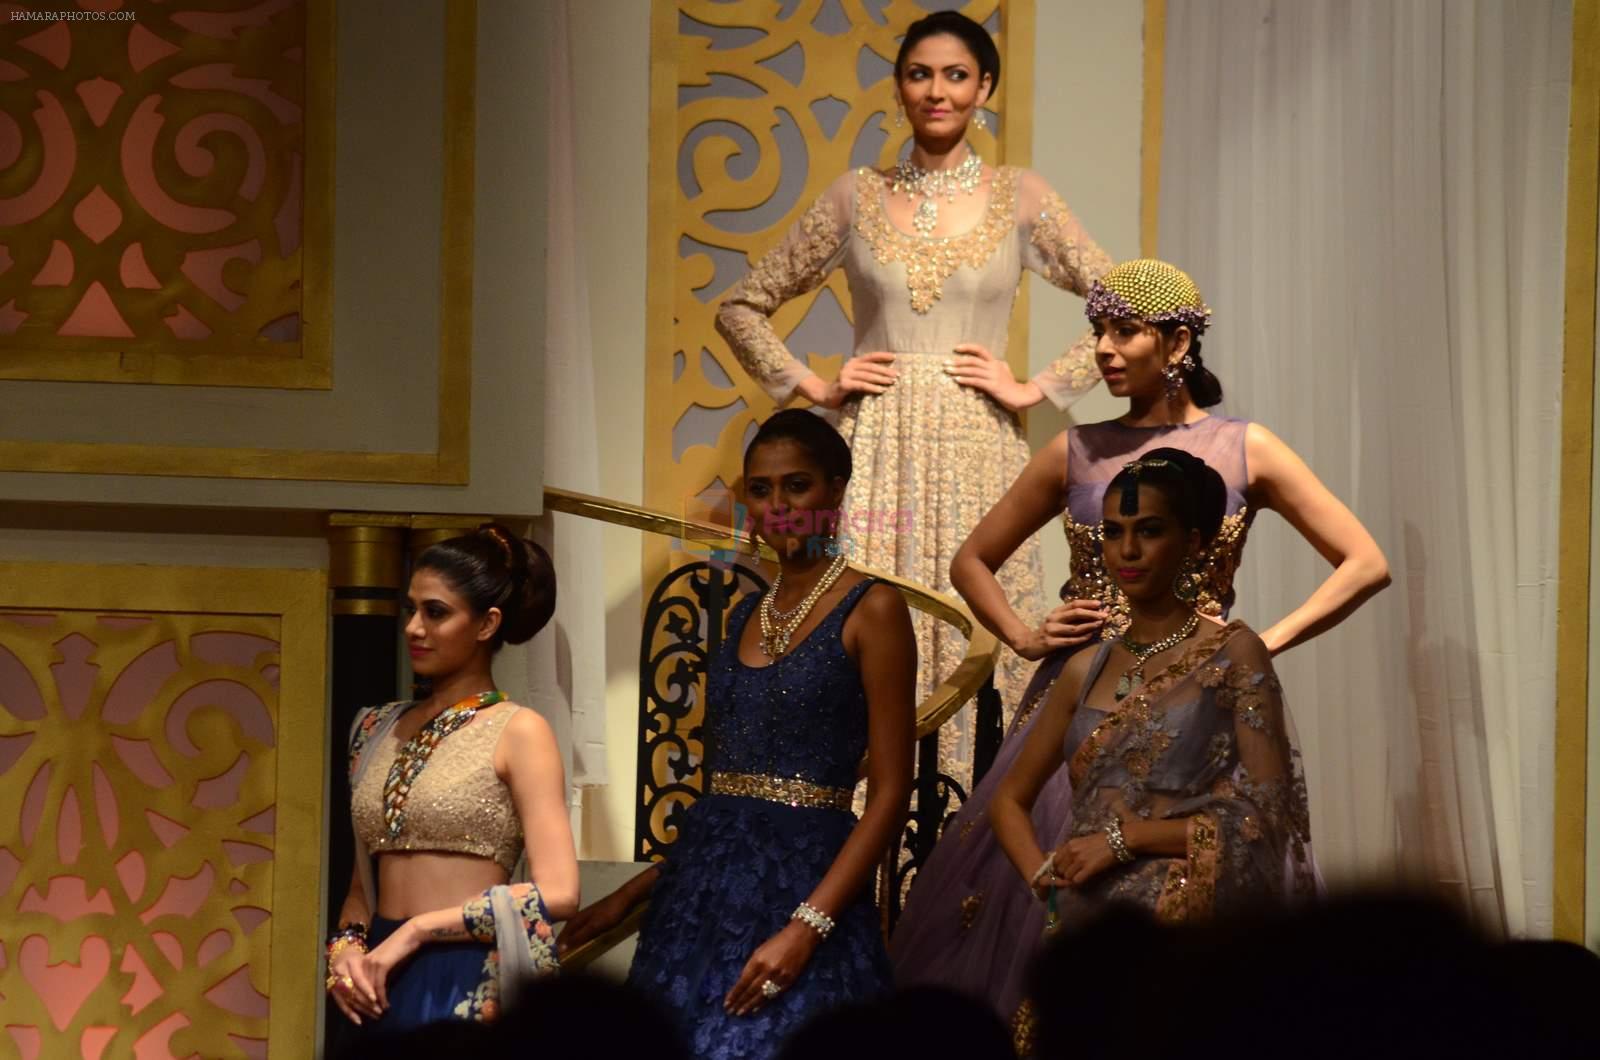 Model walk the ramp for Shyamal bhumika Grand Finale Show at IIJW 2015 on 6th Aug 2015